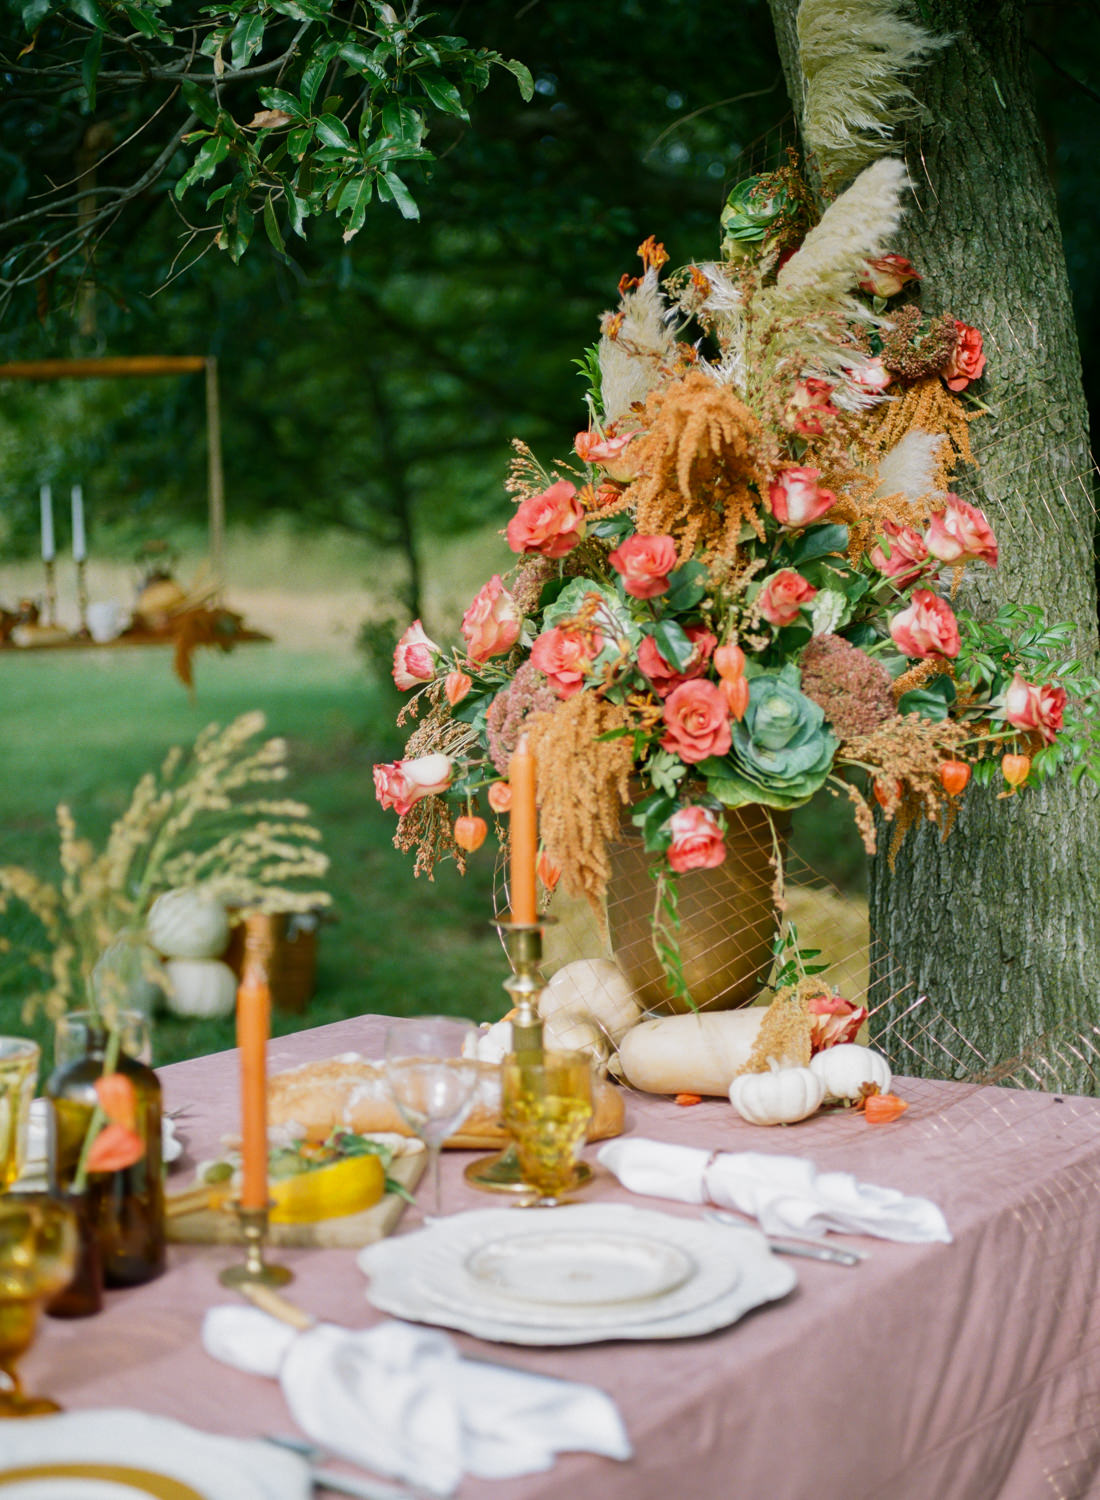 Colored glass, orange taper candles, orange and red autumn florals, vintage china, rose velvet tablecloth, pumpkin decor; Thanksgiving table at Emerson Fields; St. Louis fine art film wedding photographer Erica Robnett Photography